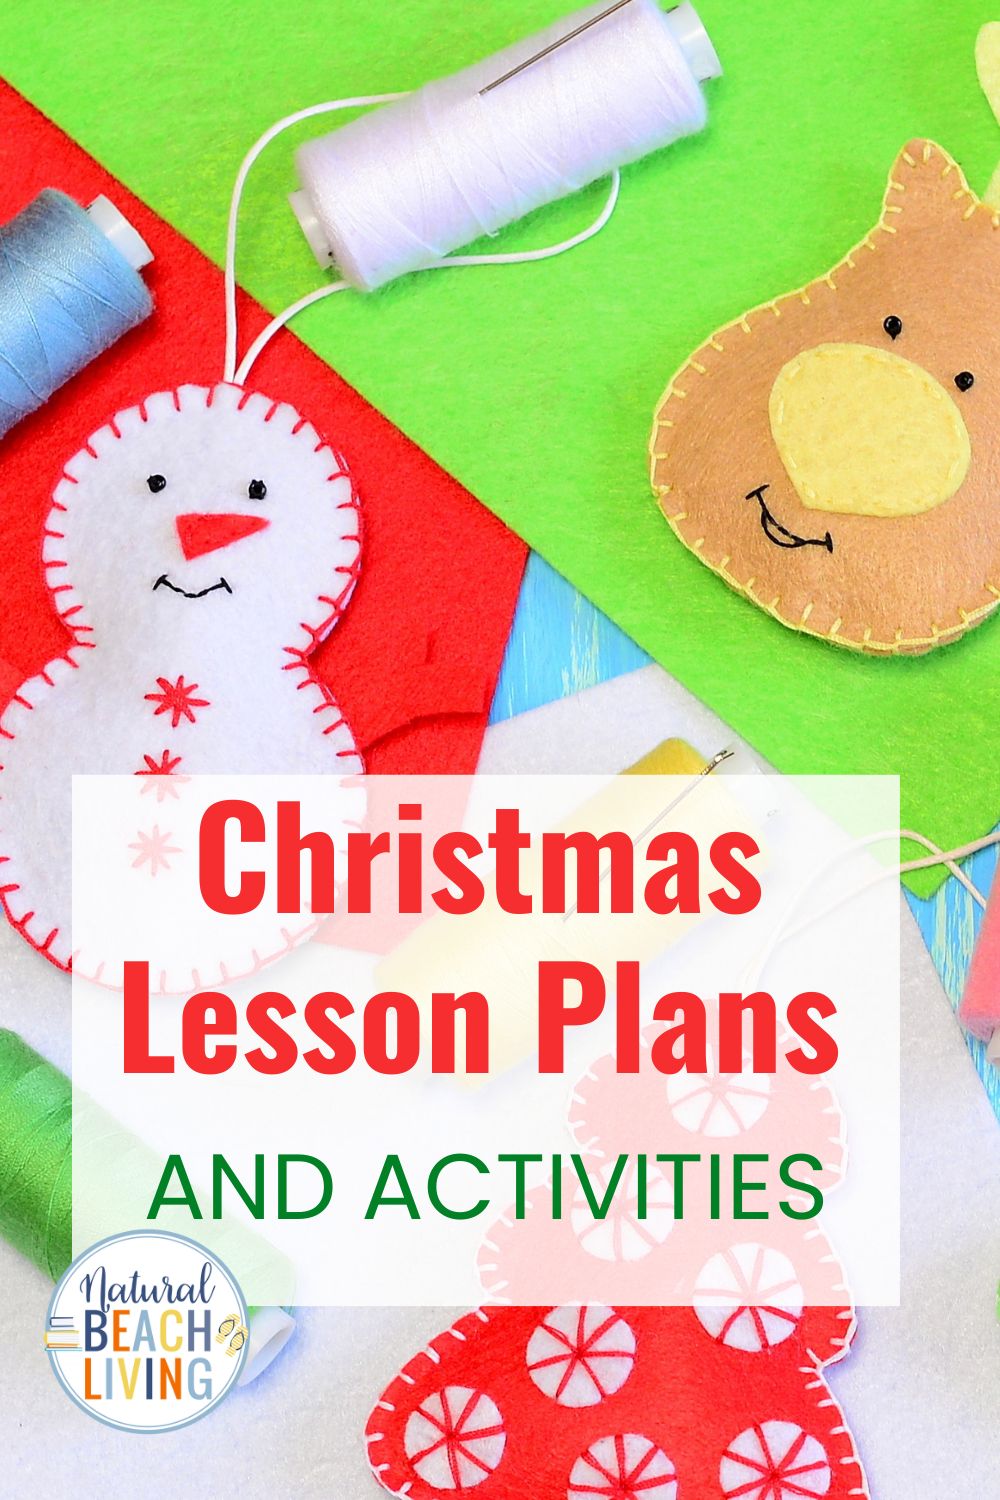 Find all of your Christmas Lesson Plans and Preschool Christmas Themes and Activities, Fun and Festive themes for the Winter holidays